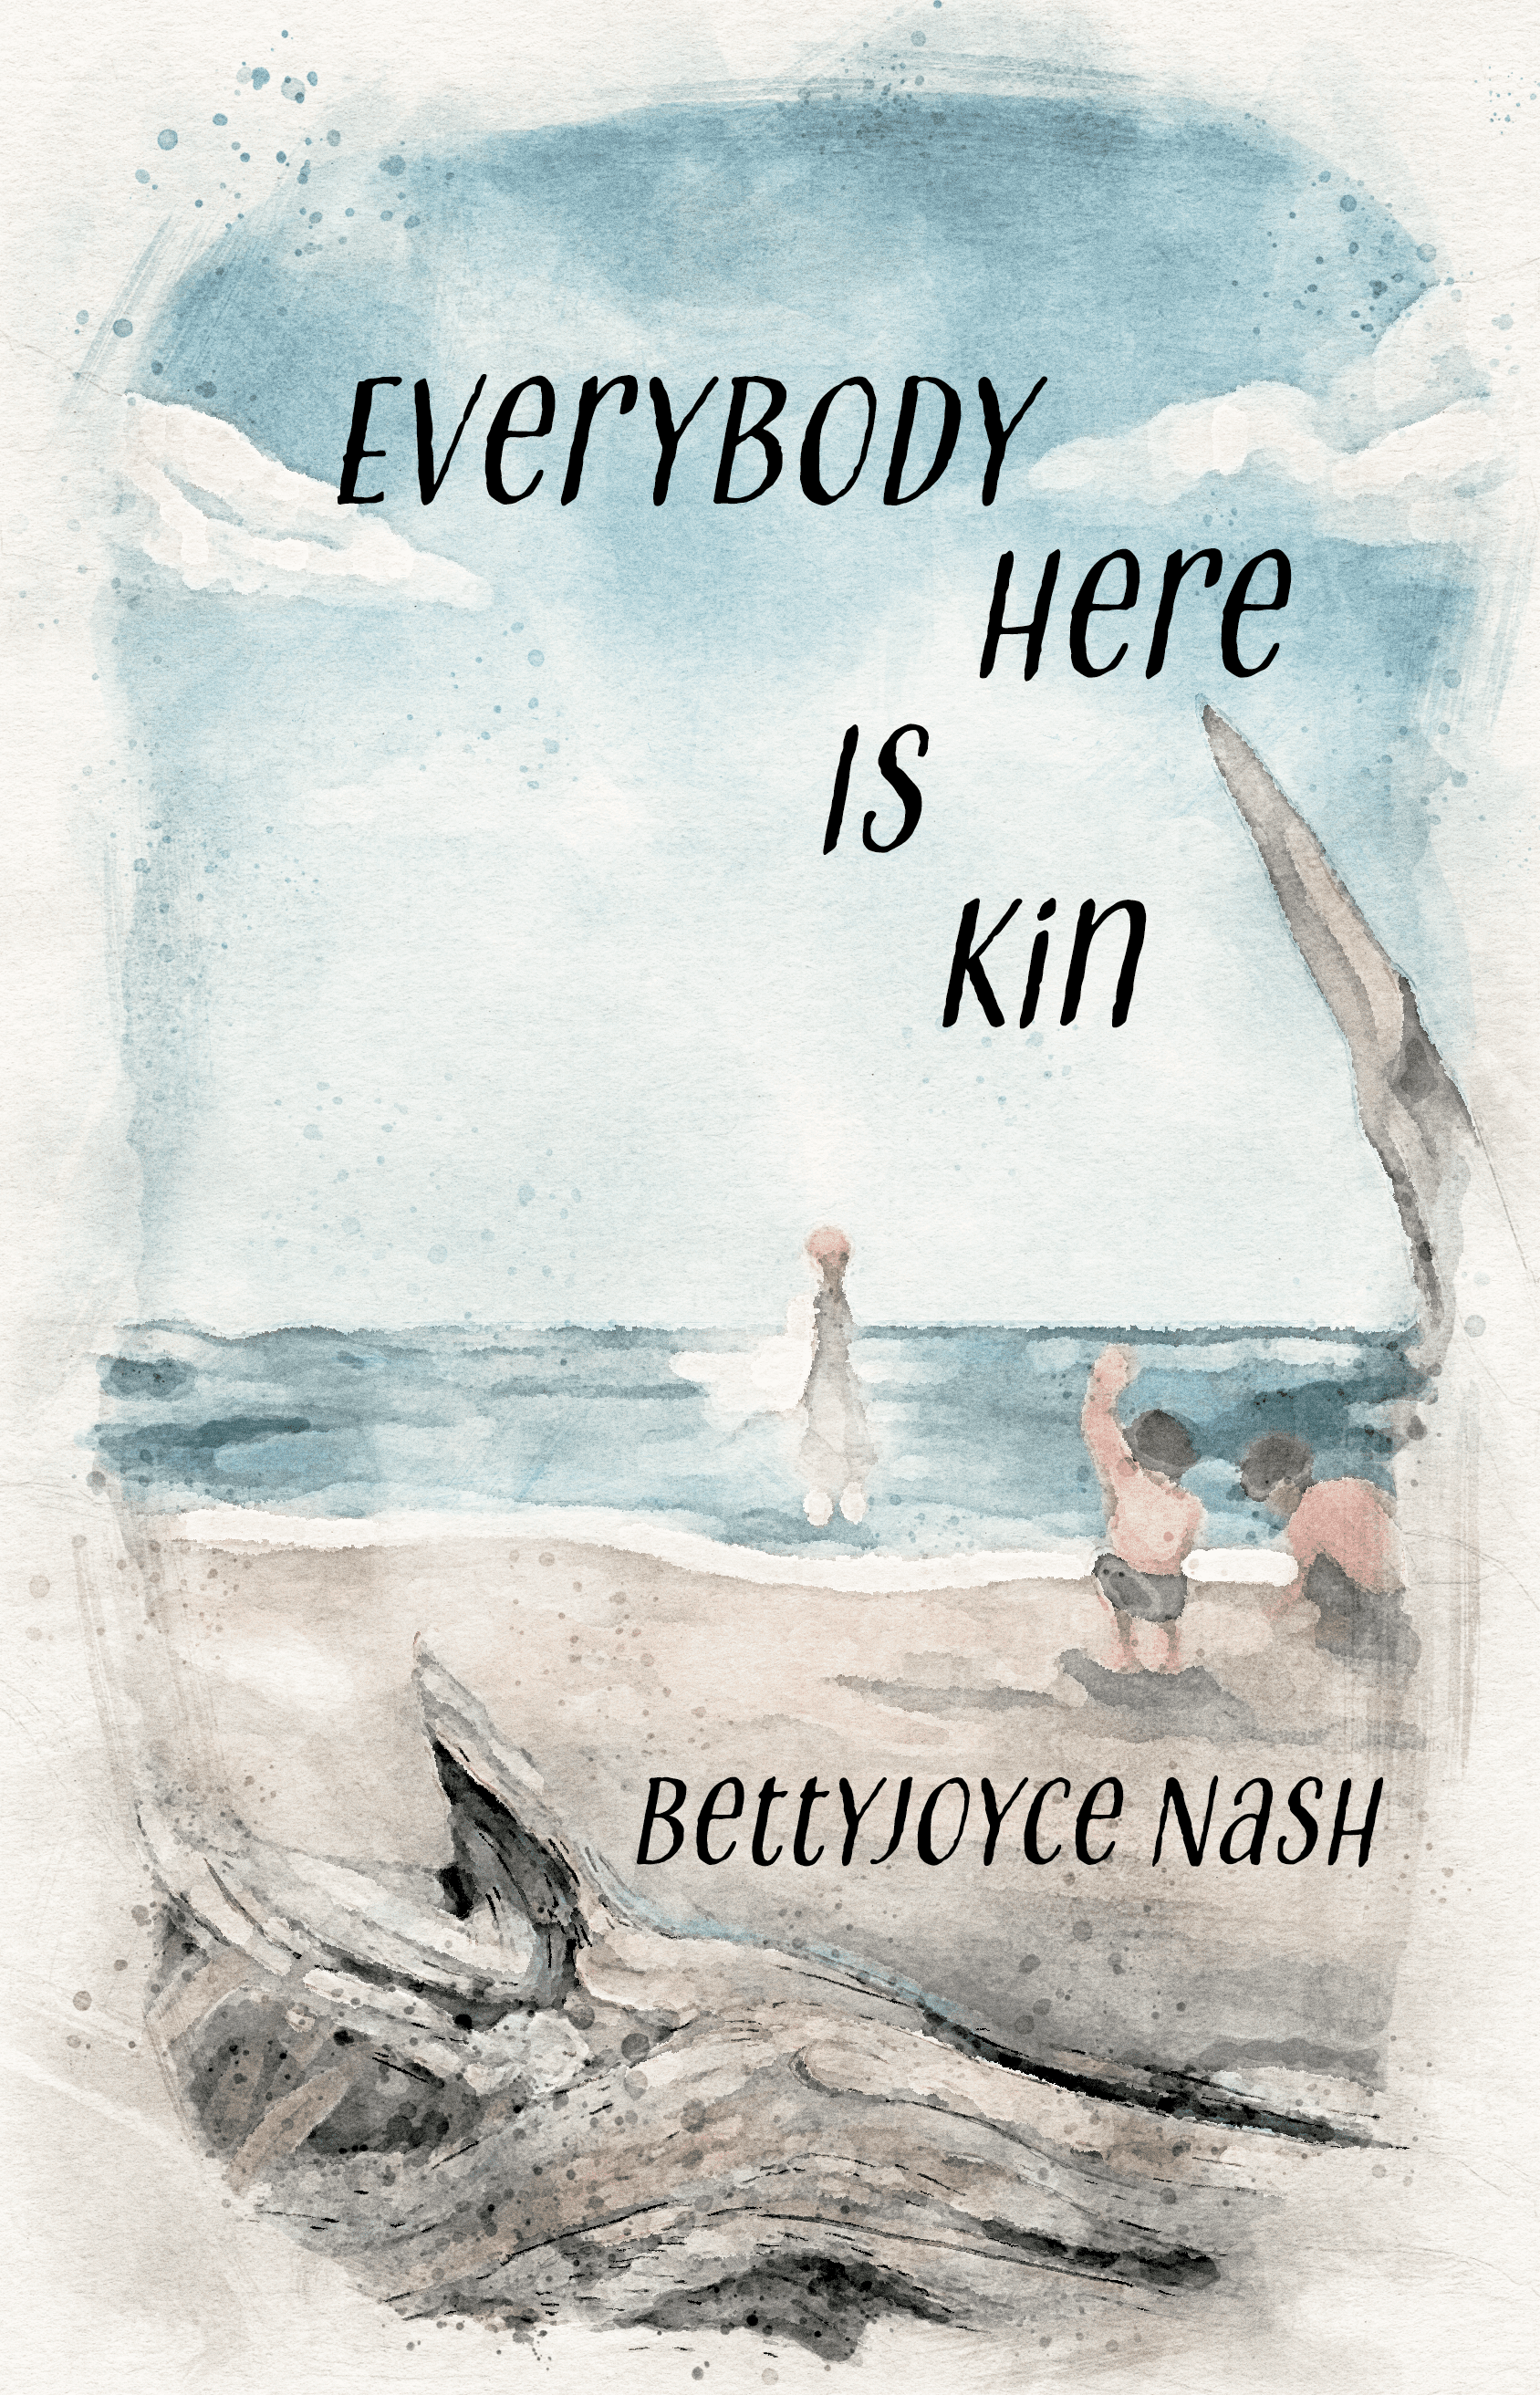 Everybody Here is Kin, a coming of age novel by BettyJoyce Nash. Cover shows a watercolor image of two dark haired children on a beach with a taller girl wading in the water.